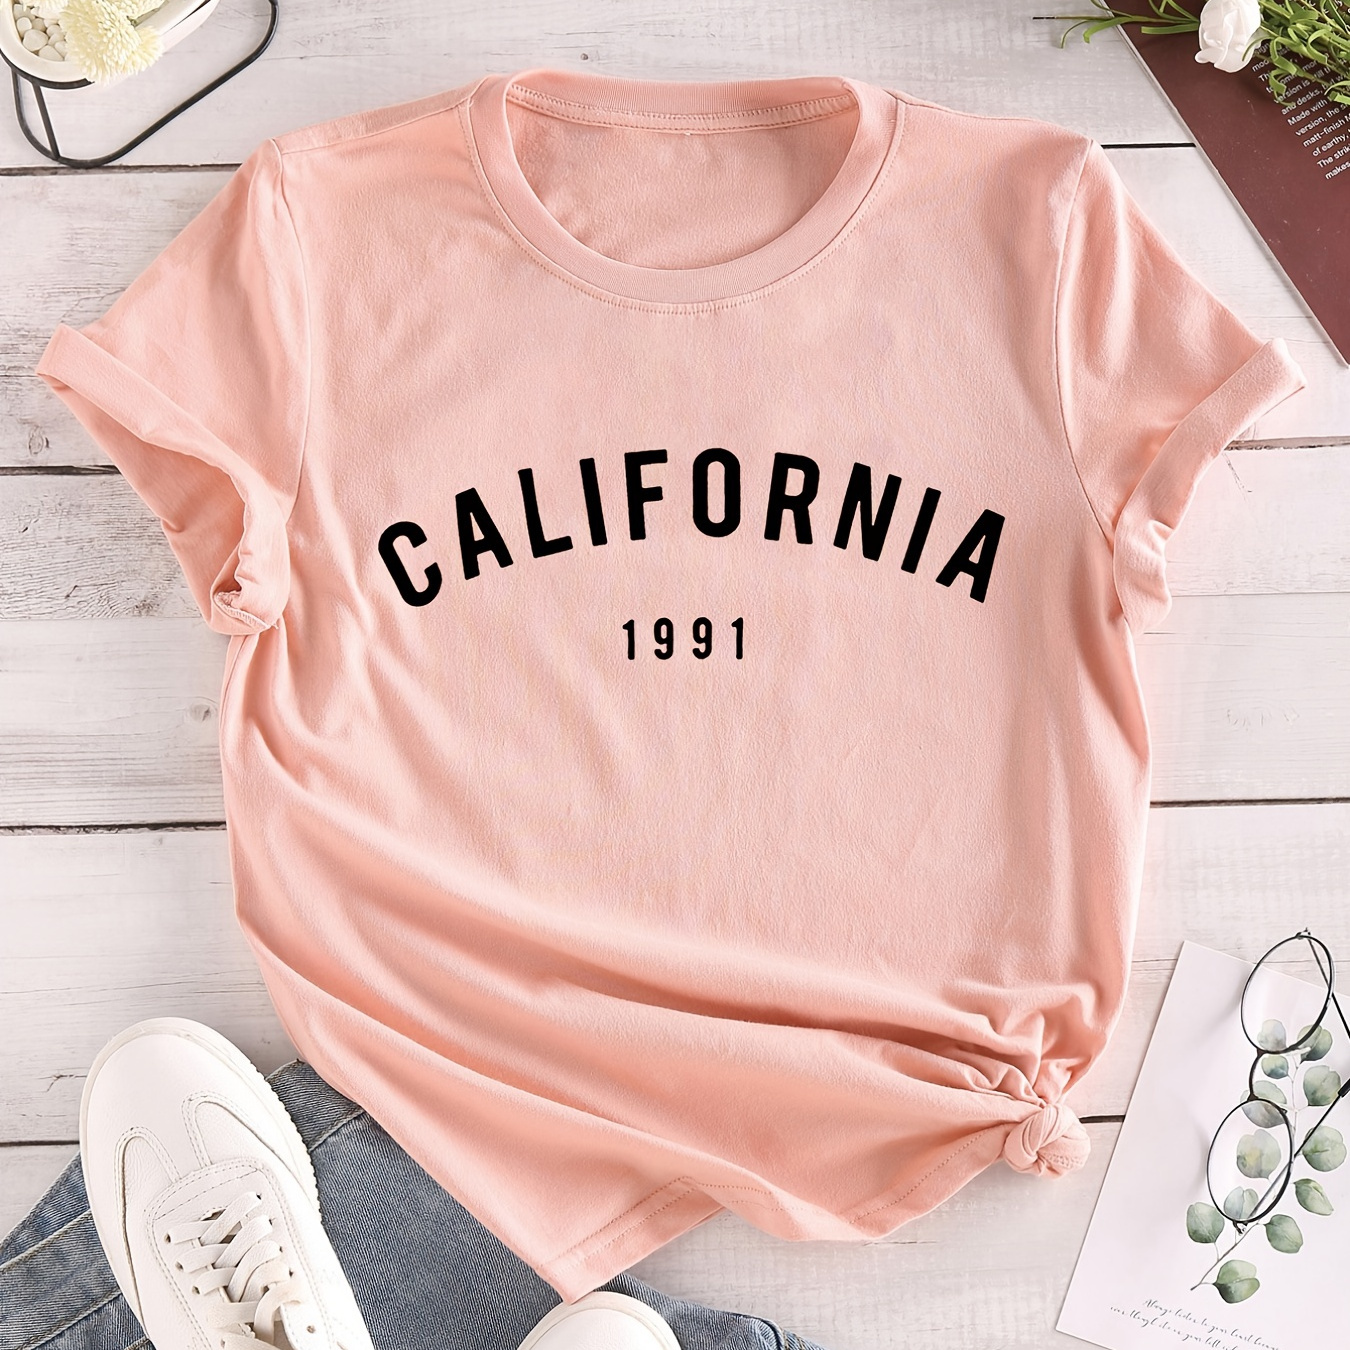 

California Letter Print T-shirt, Crew Neck Short Sleeve T-shirt, Casual Every Day Tops, Women's Clothing